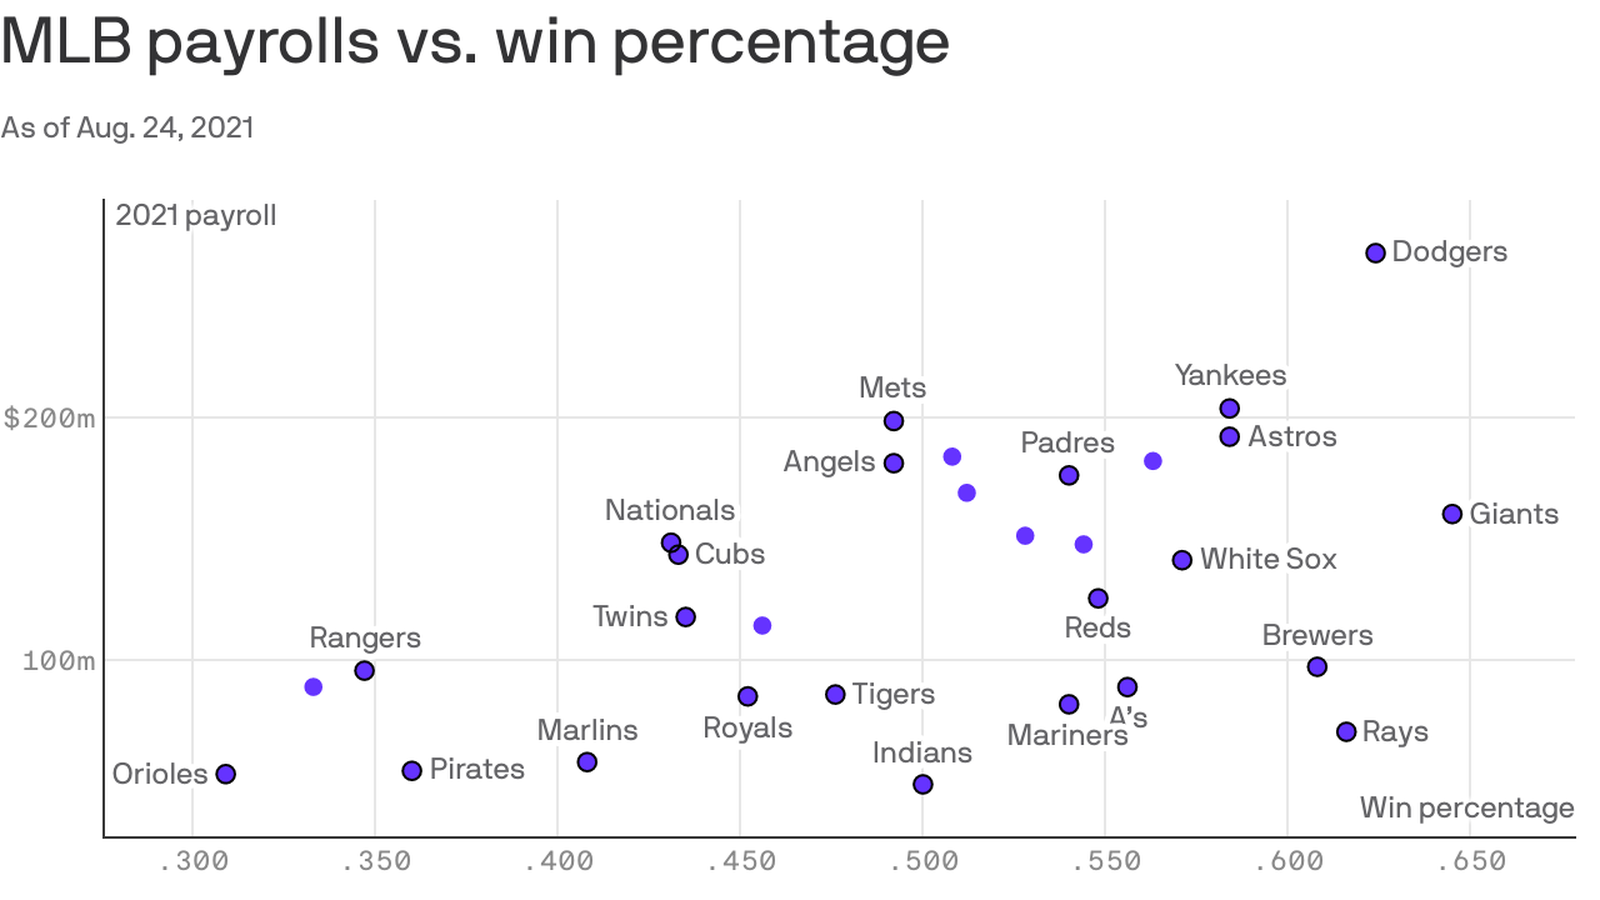 The strong connection between MLB payrolls and wins